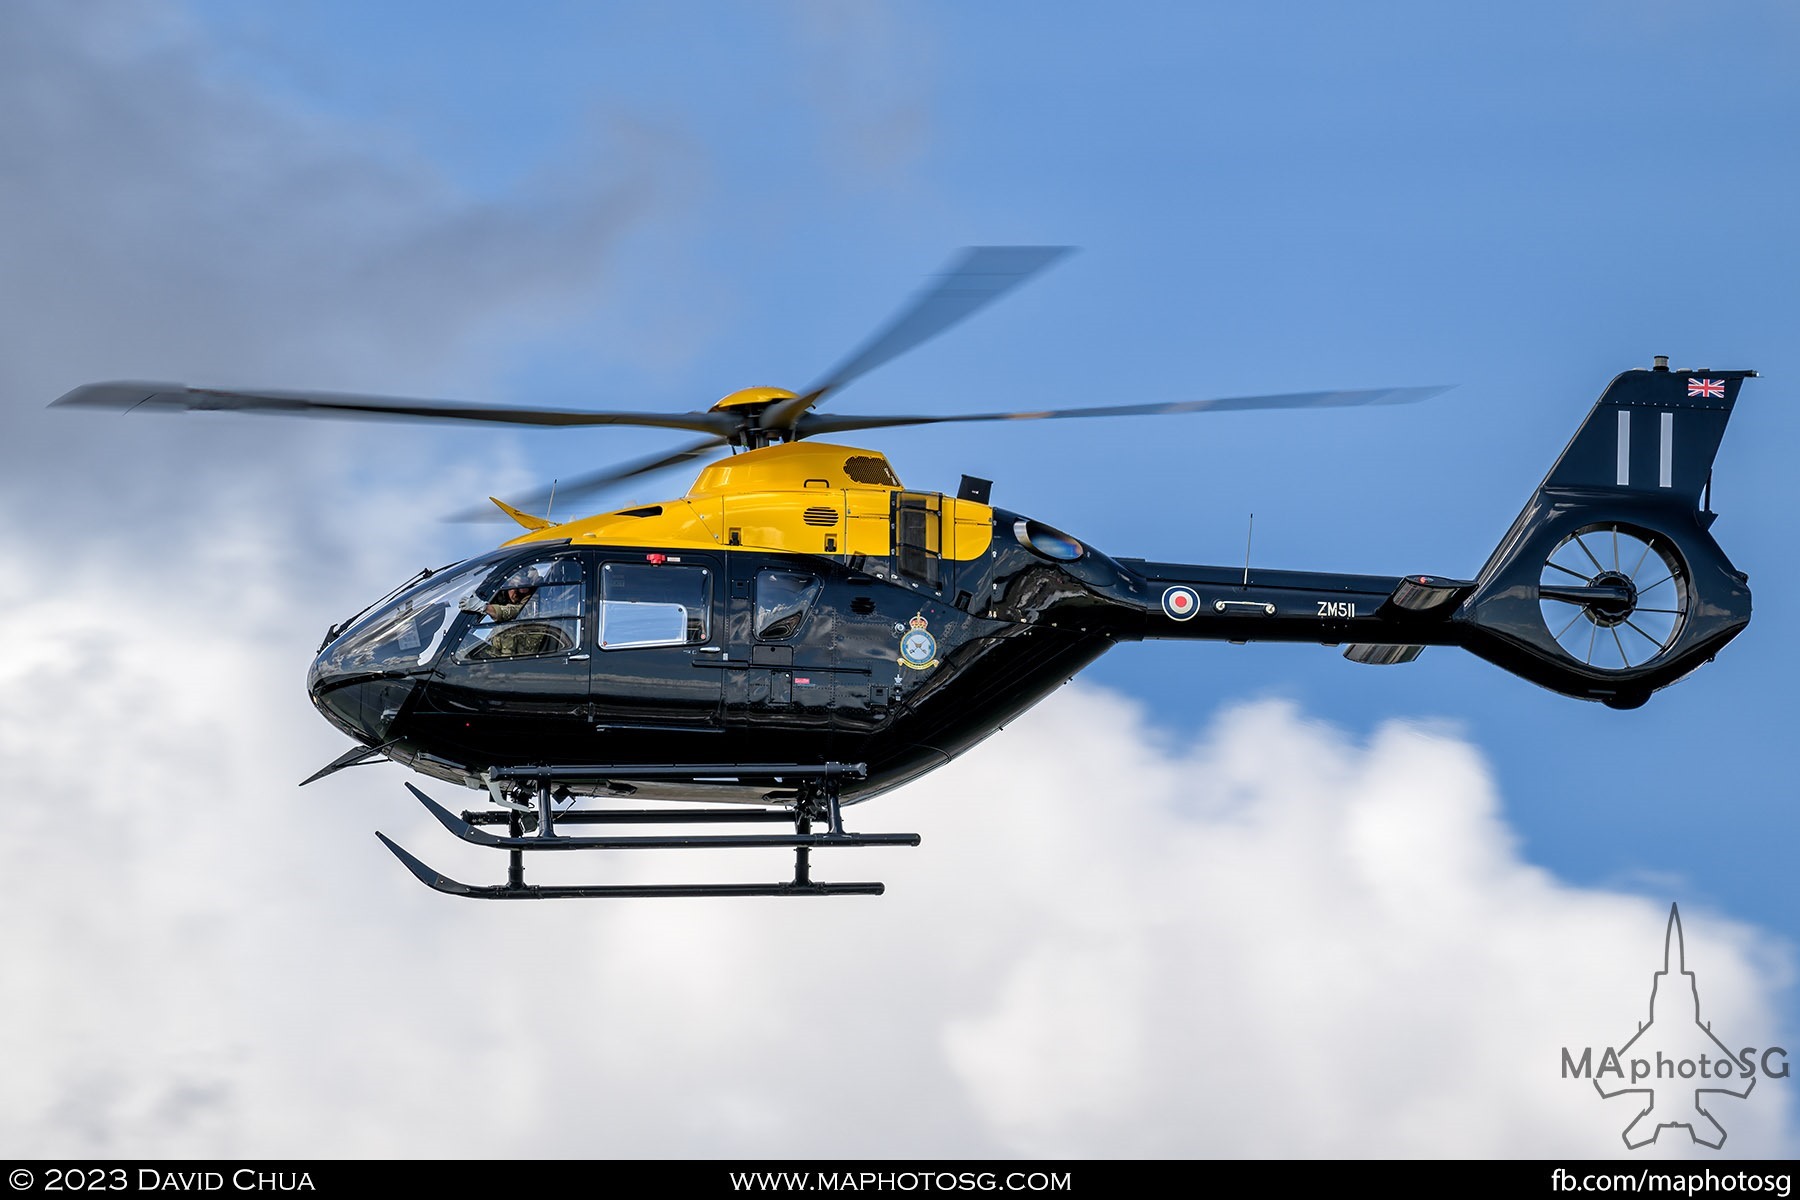 Royal Air Force Airbus Helicopters Juno HT.1